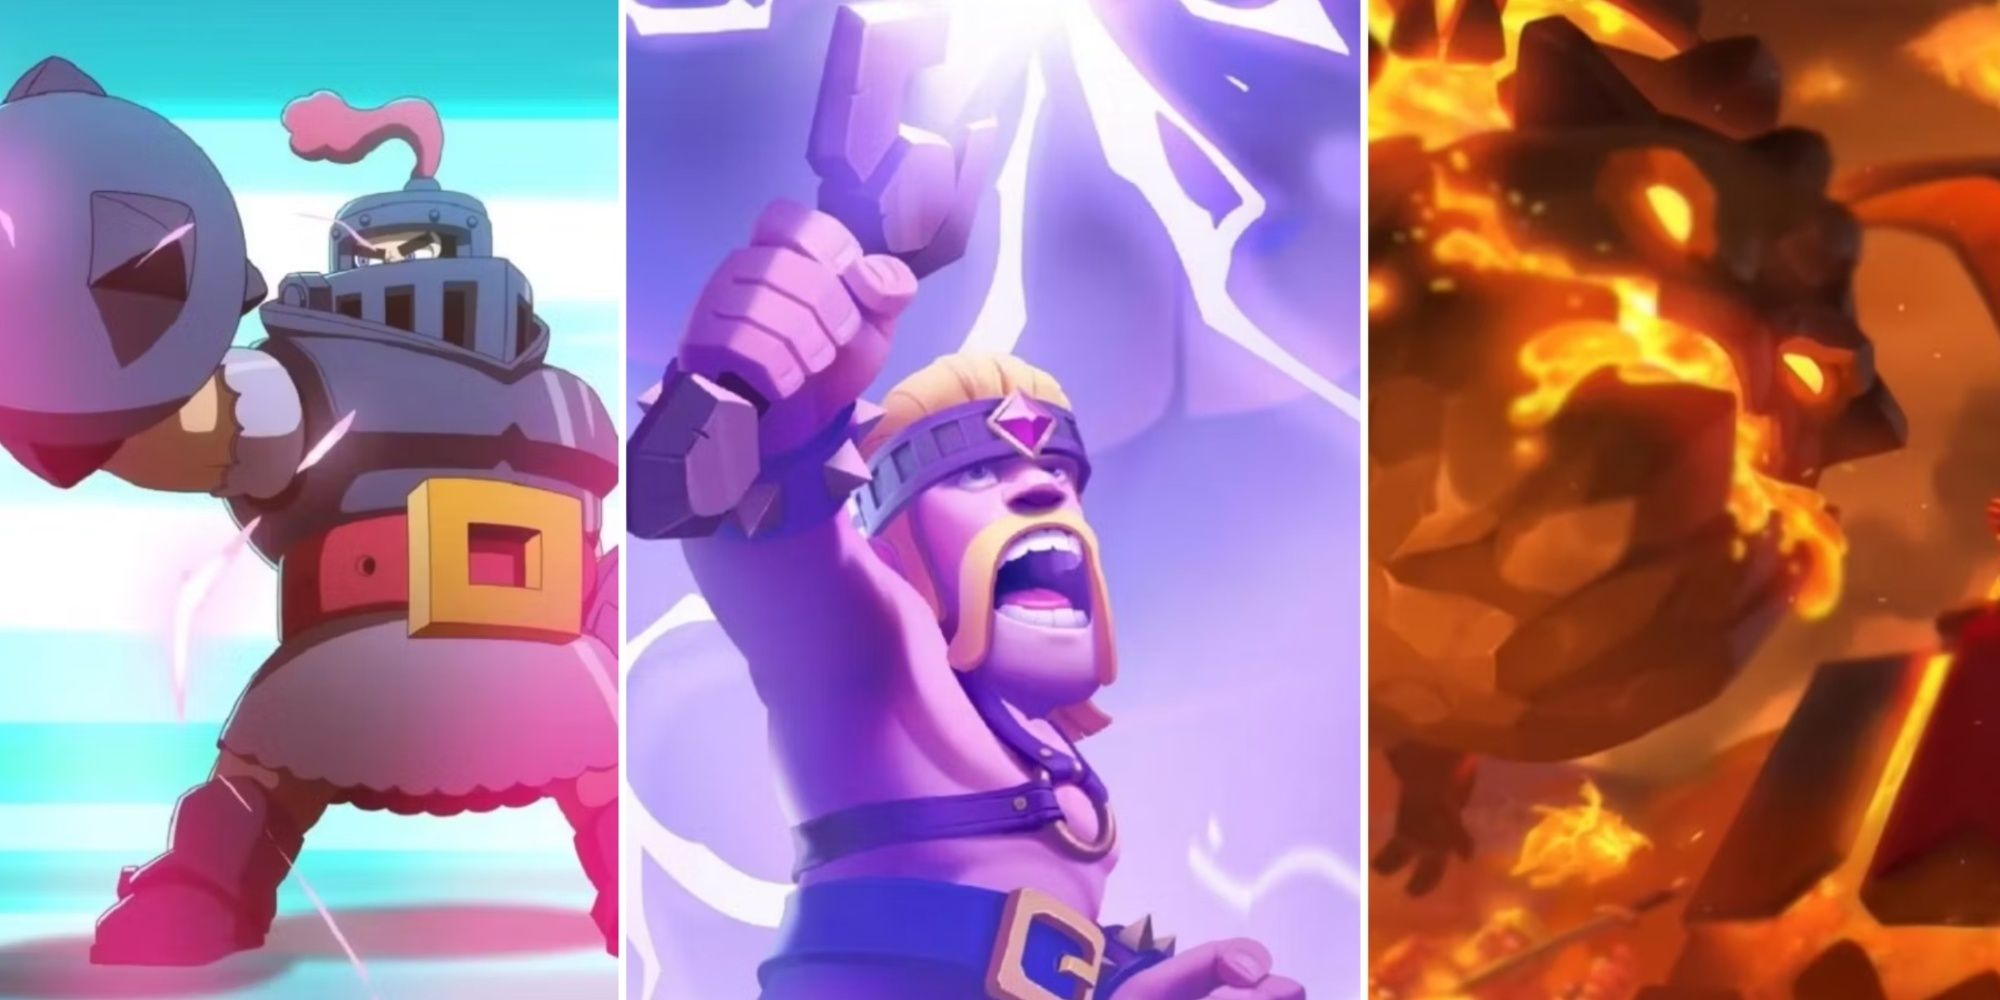 Cover Image For 8 Cards To Upgrade First In Clash Royale With Megaknight, Barbarian, And LavaHound Art